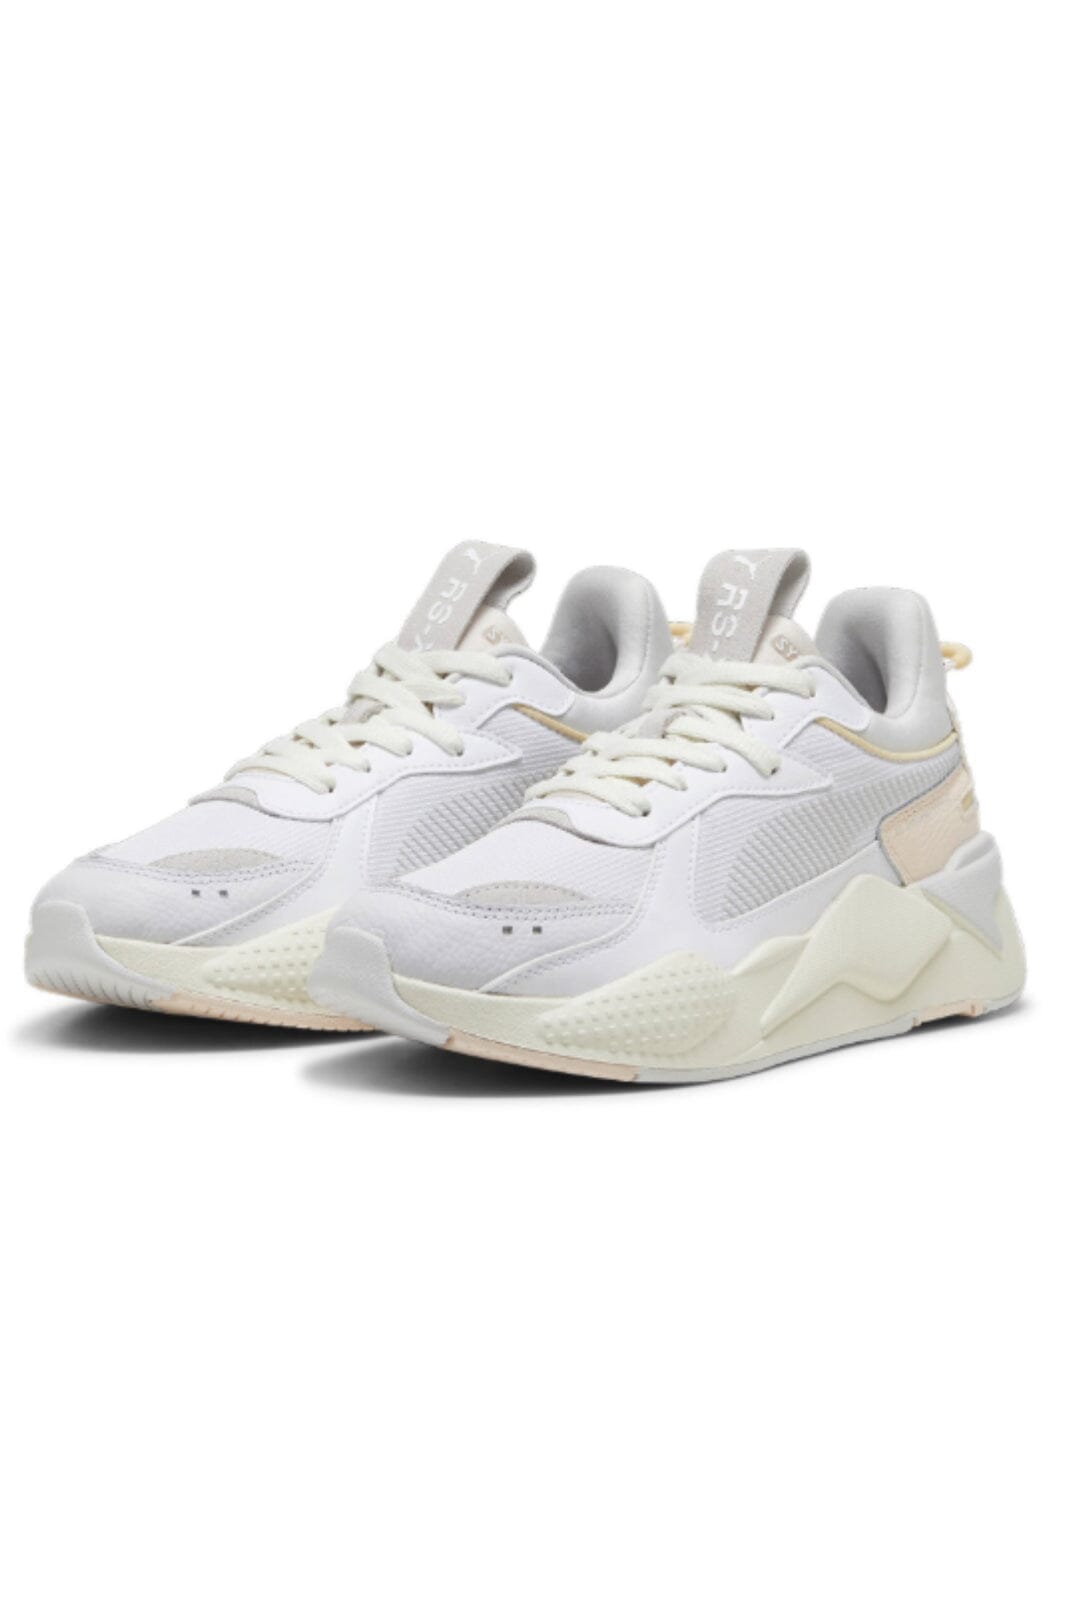 Puma - RS-X Soft Wns - Pink 3 Sneakers 